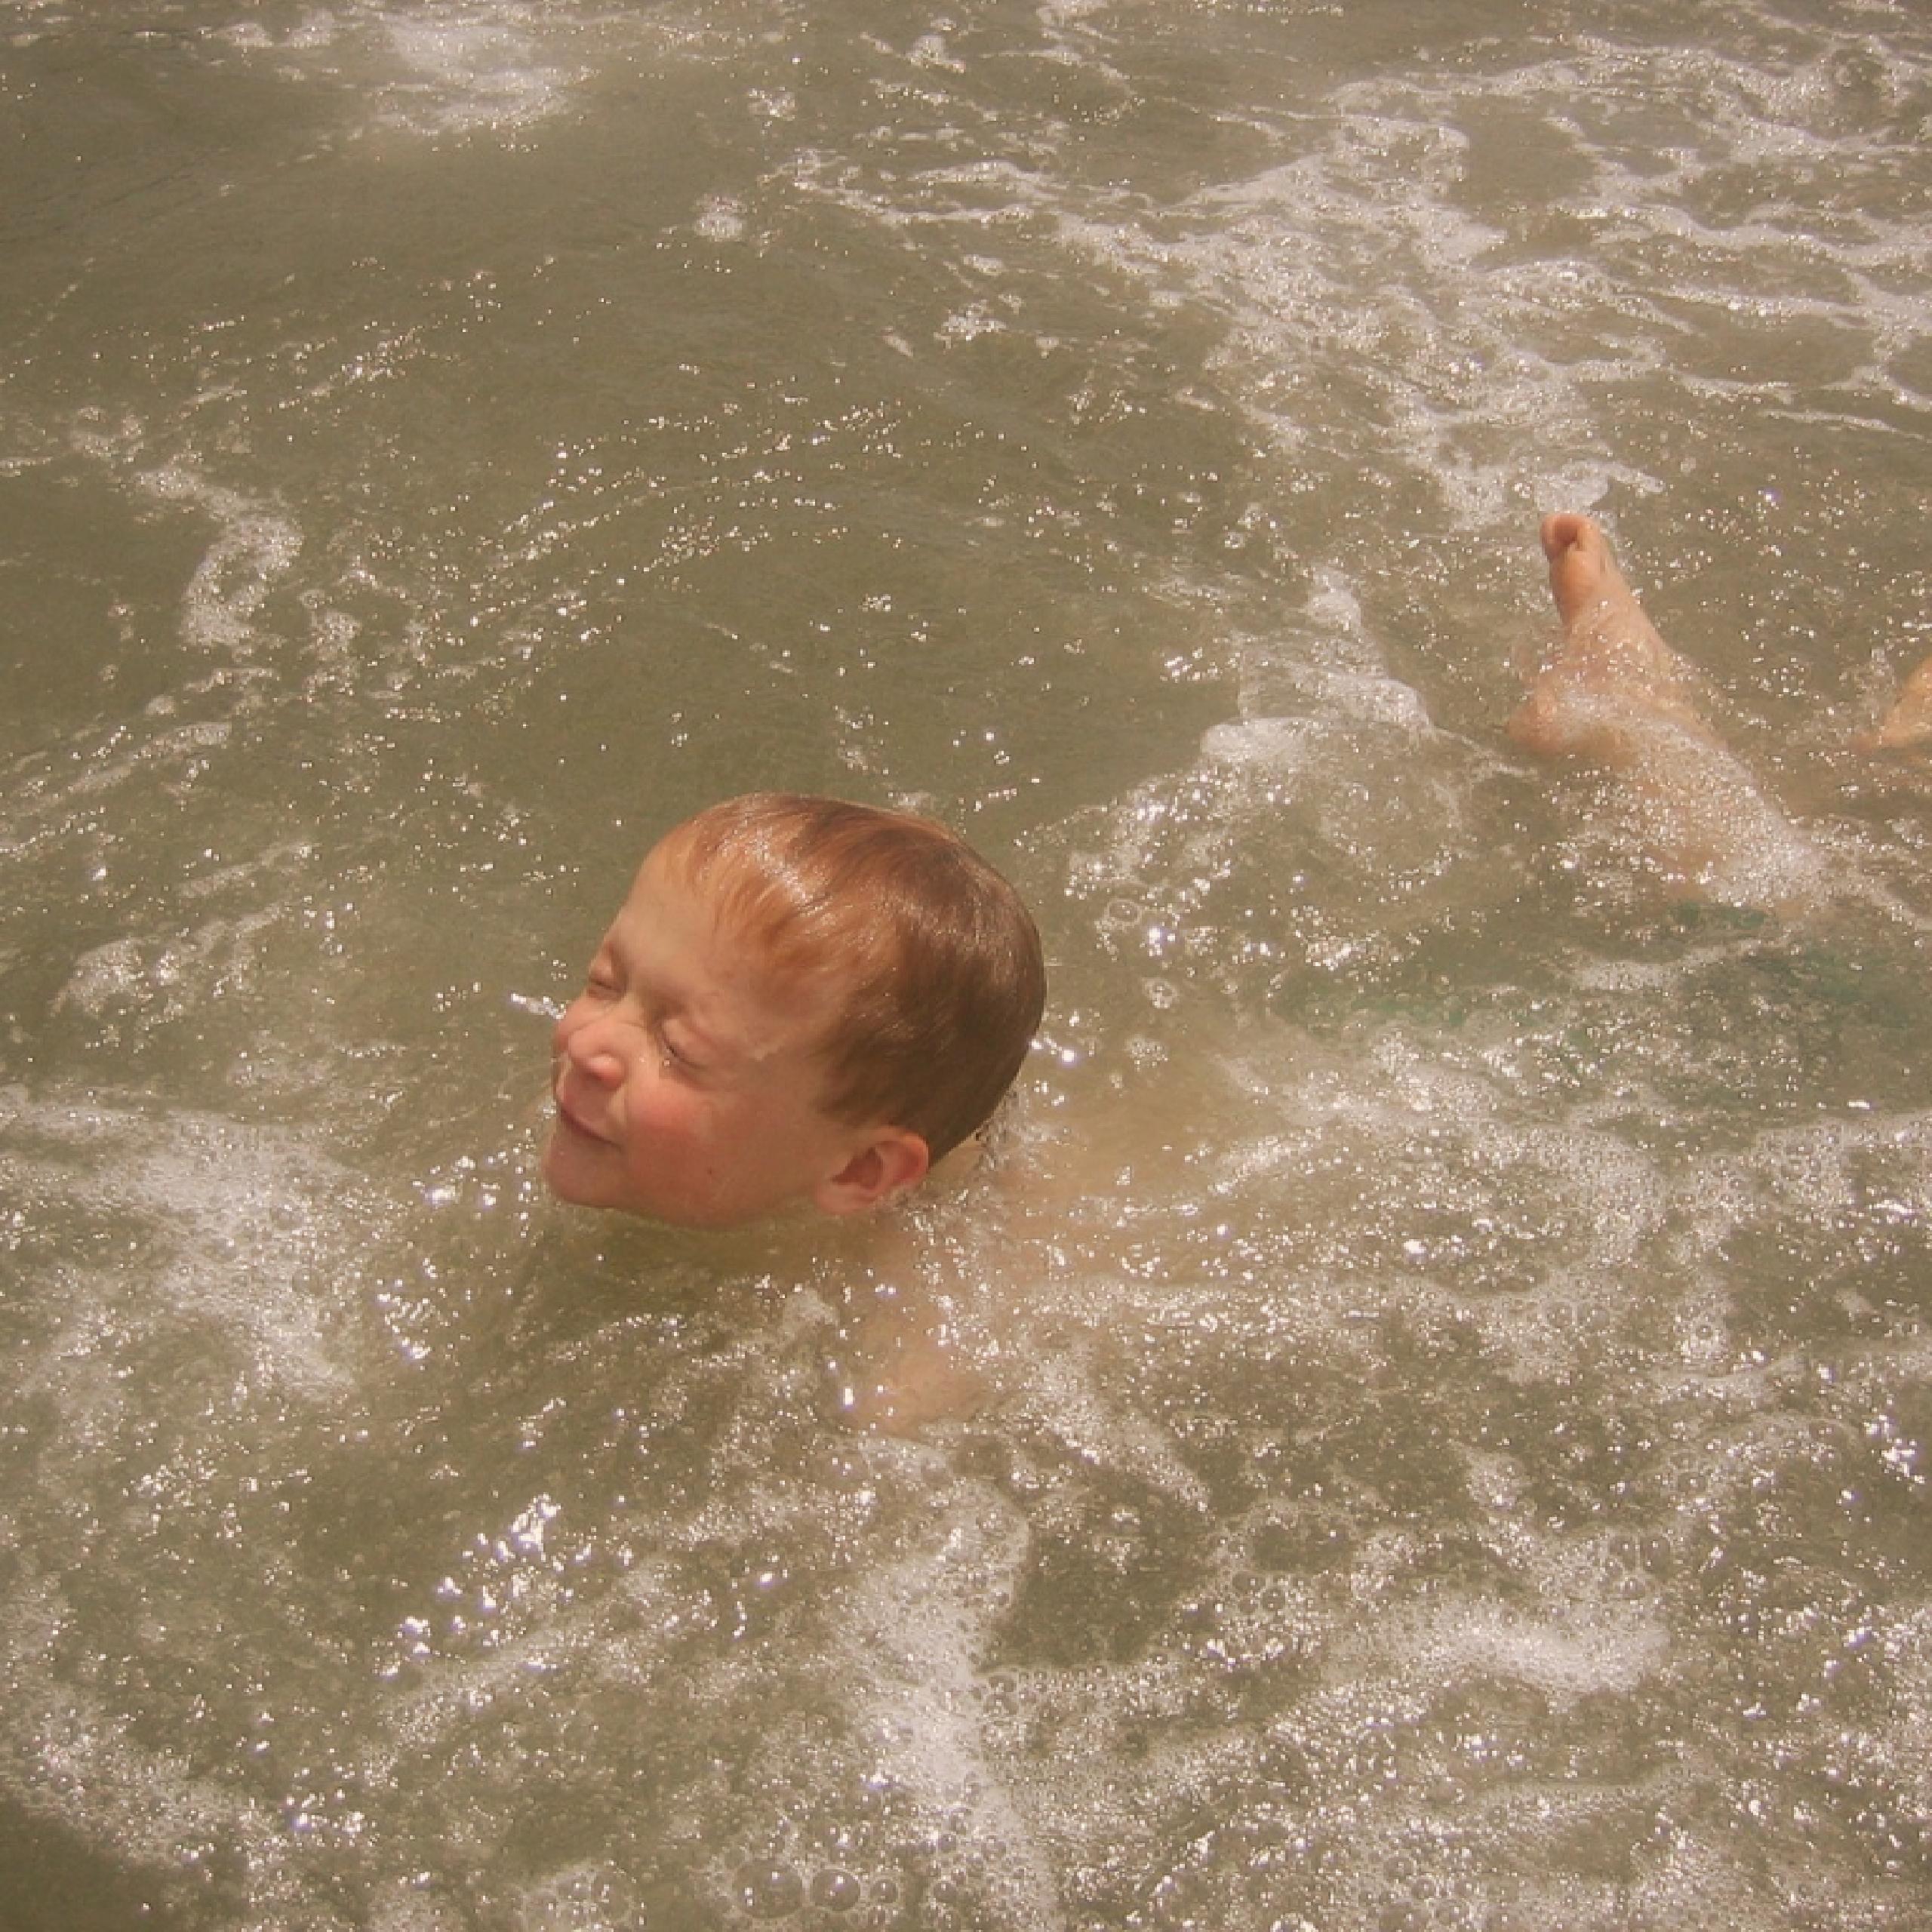 young boy drowning while trying to swim